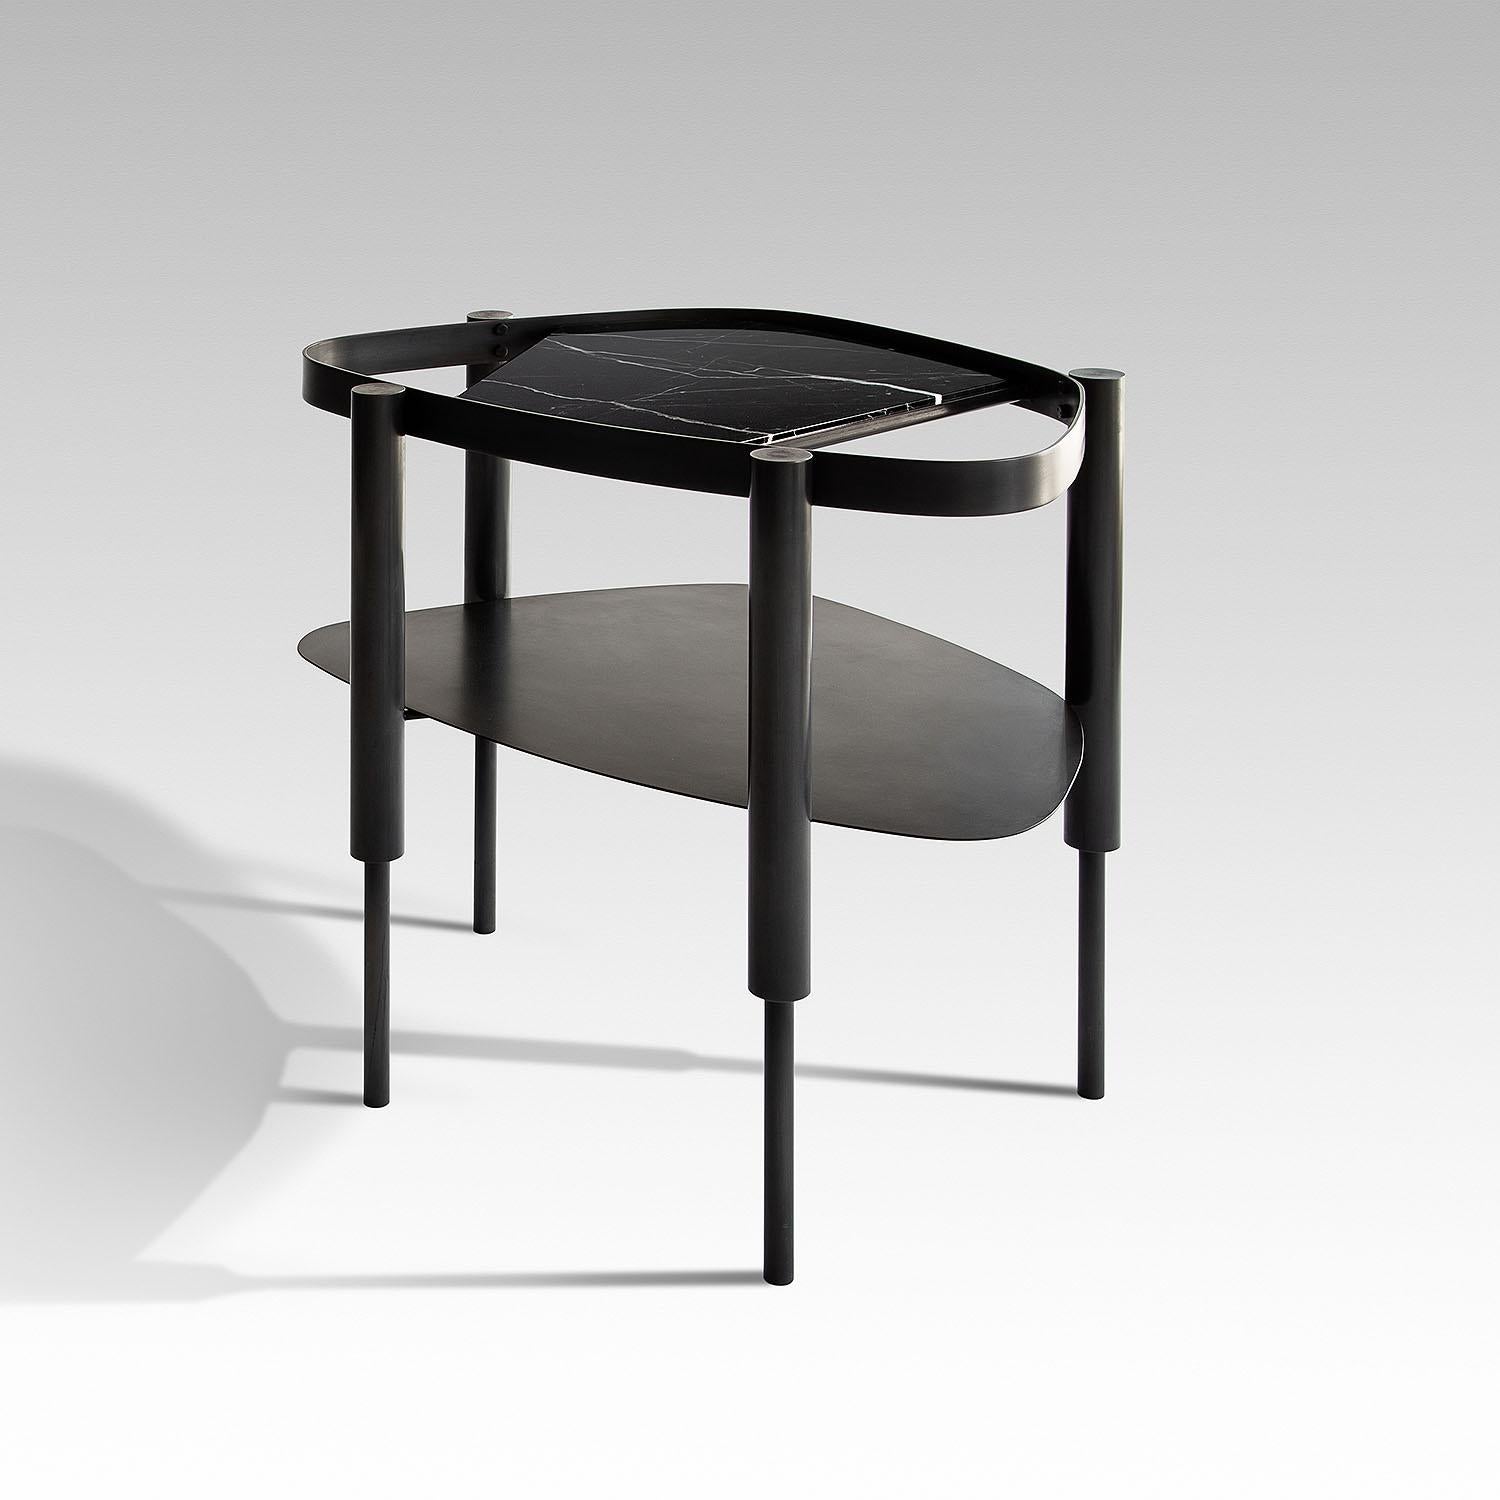 Contemporary black marble & steel side table - Bijou Black by Adam Court for Okha

Design: Adam Court

Material: patinated blue black mild steel frame clear / grey / bronze glass insert / marble insert options

Dimensions:
610W X 450D X 580H